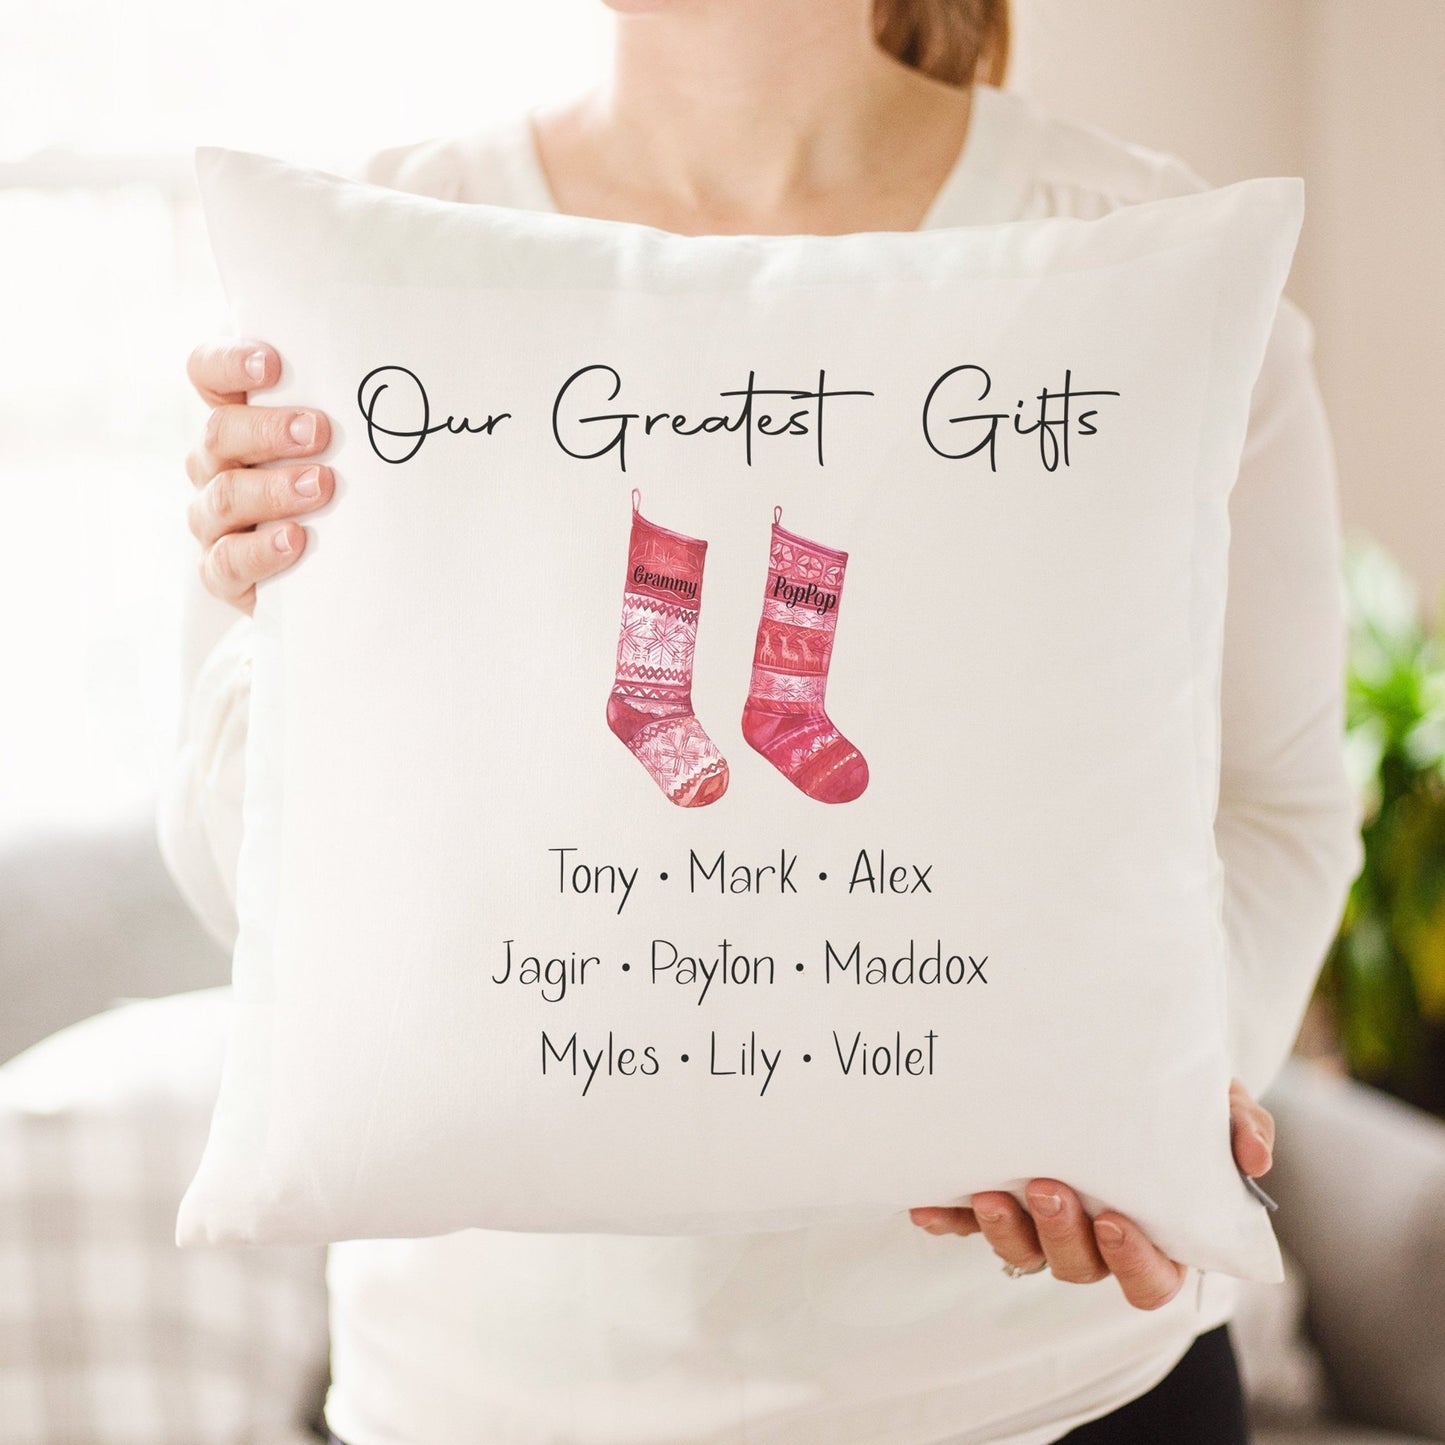 https://cdn.shopify.com/s/files/1/0667/8039/7863/products/our-greatest-gifts-personalized-christmas-pillow-family-custom-stockings-grandparents-gift-gift-for-mom-christmas-decor-gift-747985_1445x.jpg?v=1668884637